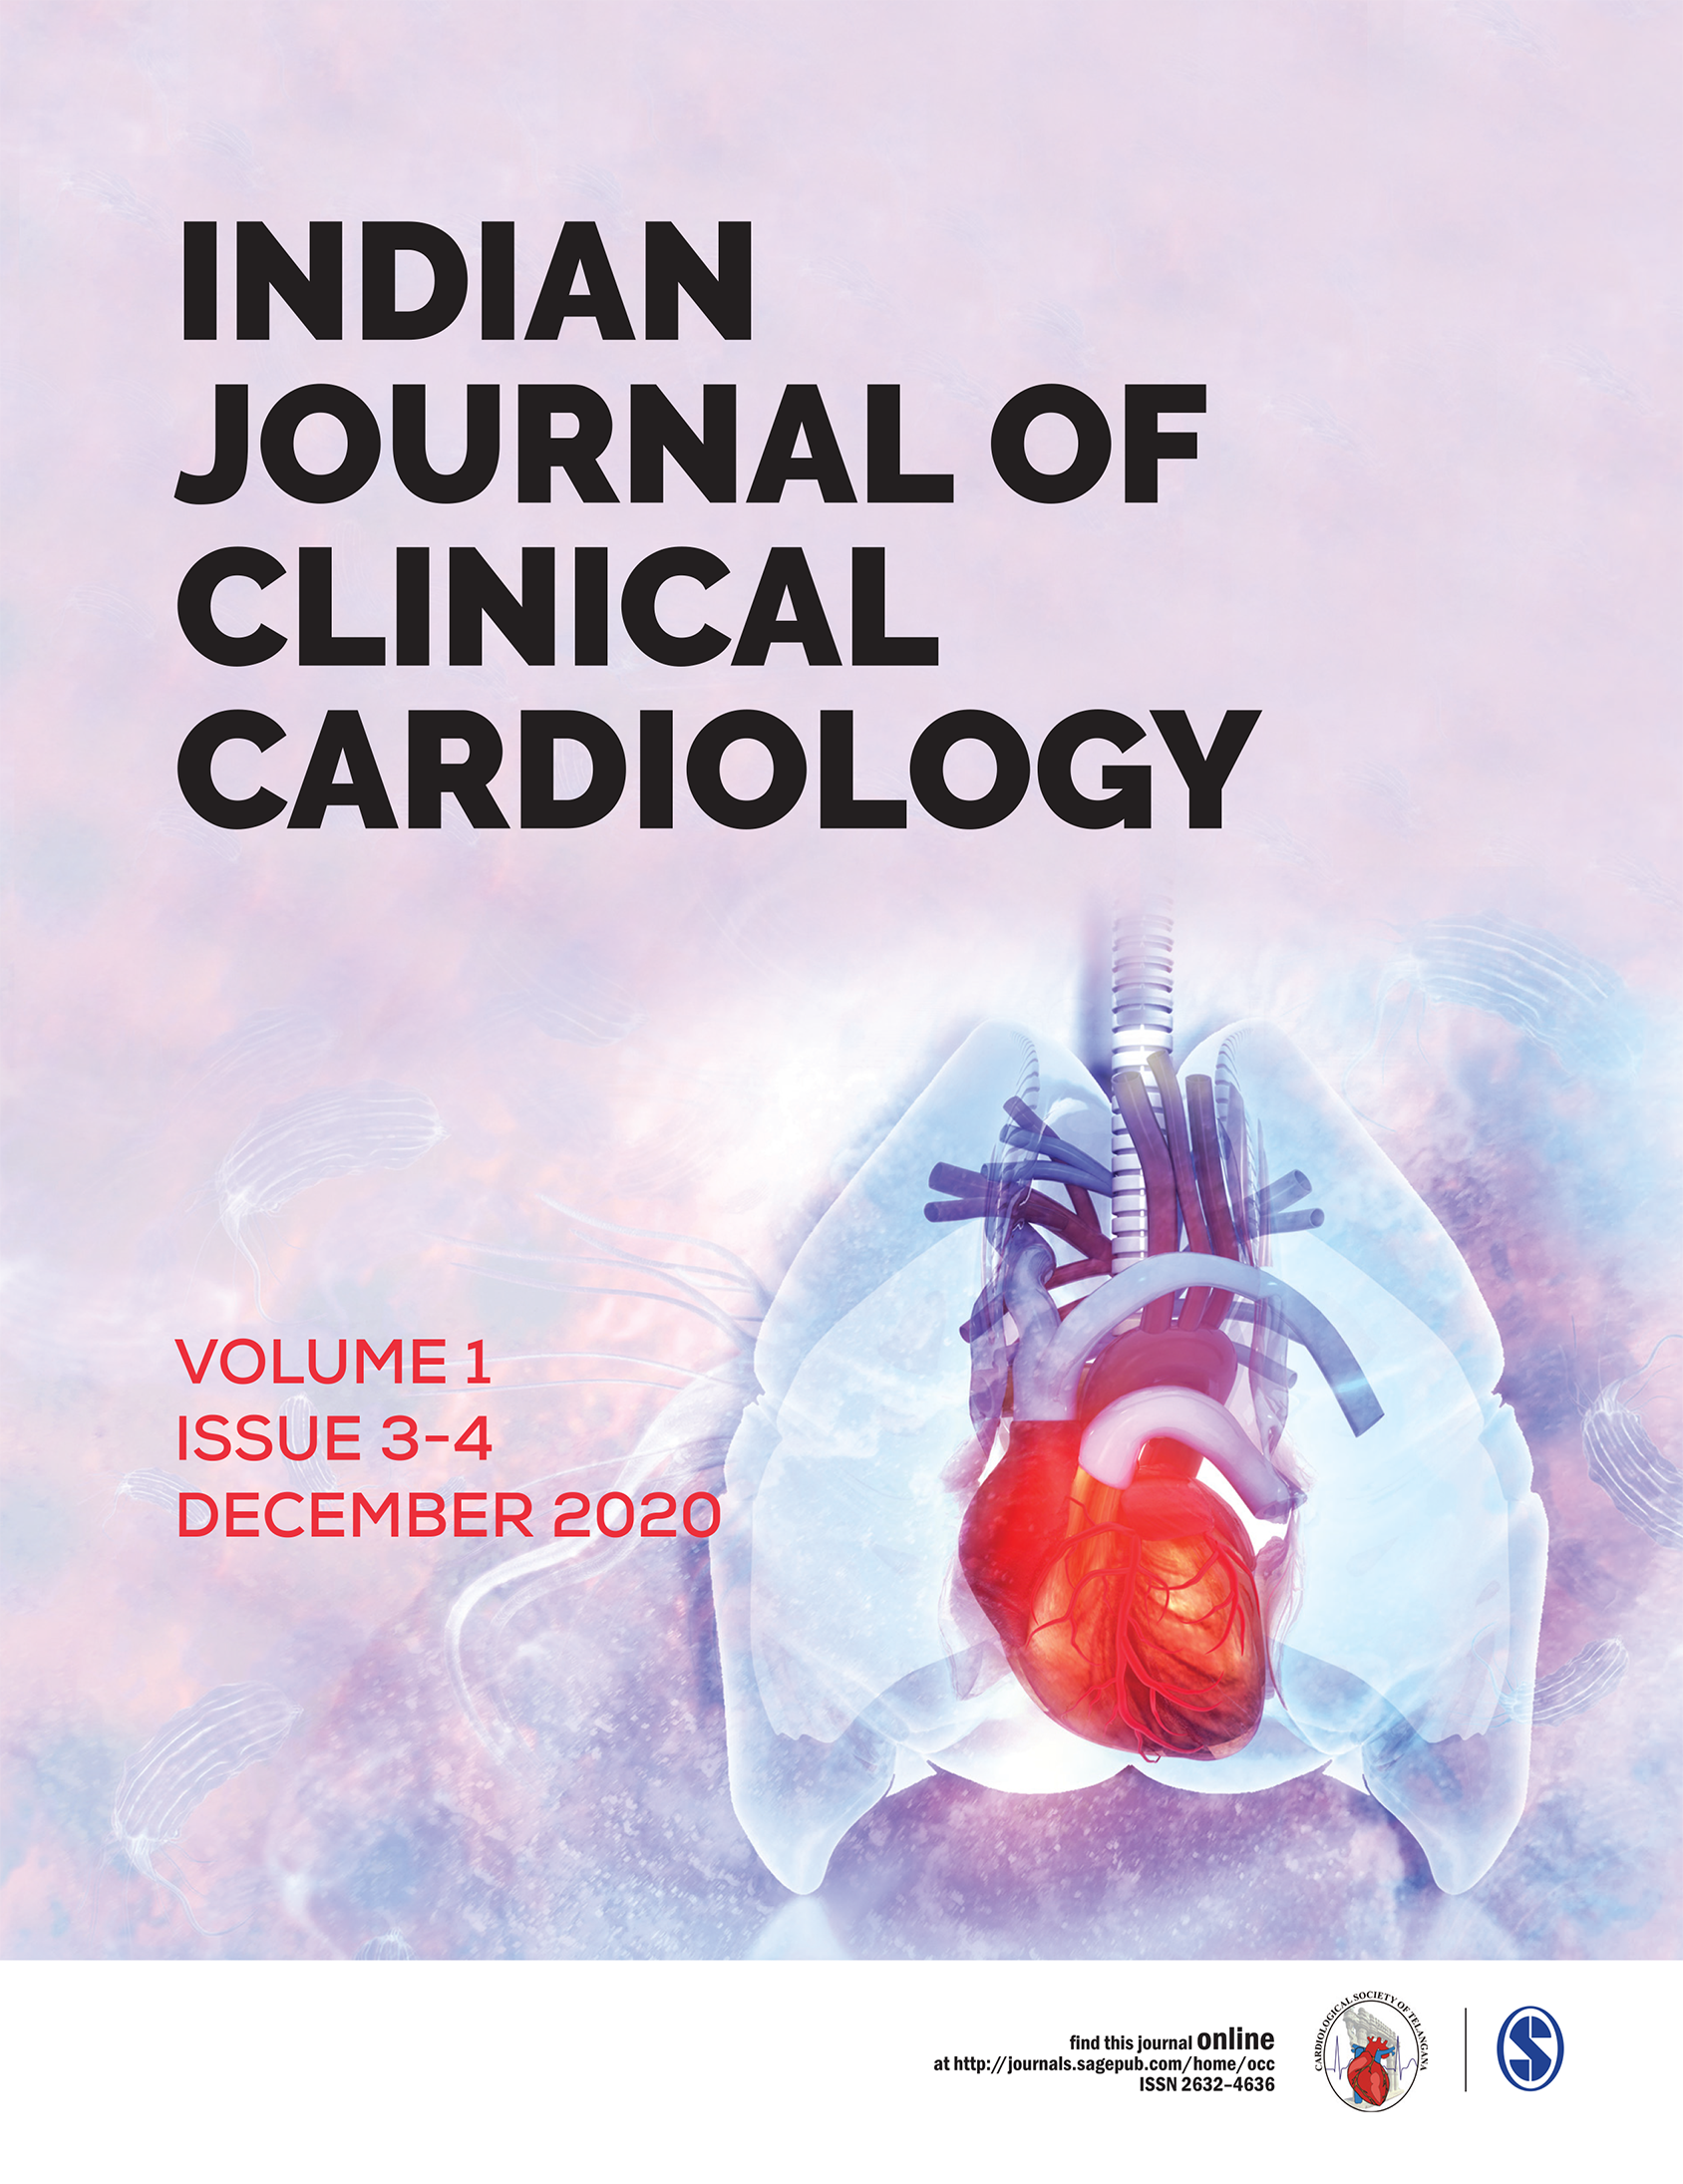 Indian Journal of Clinical Cardiology